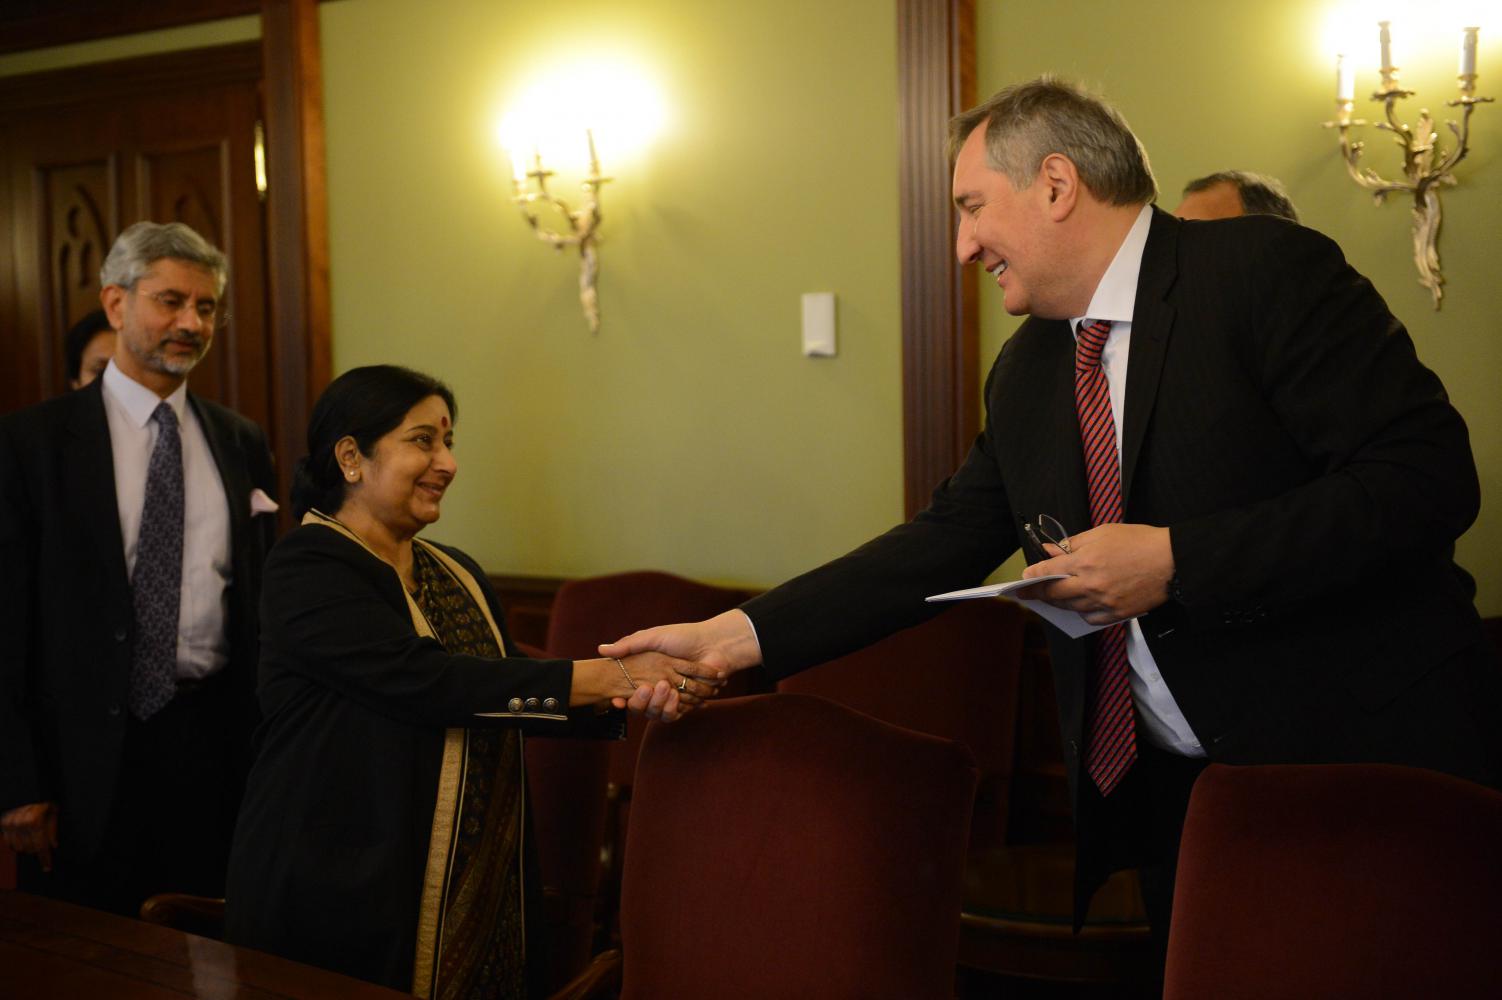 Swaraj and Rogozin reviewed progress in Russia’s participation in India’s defence sector under the Make In India program.